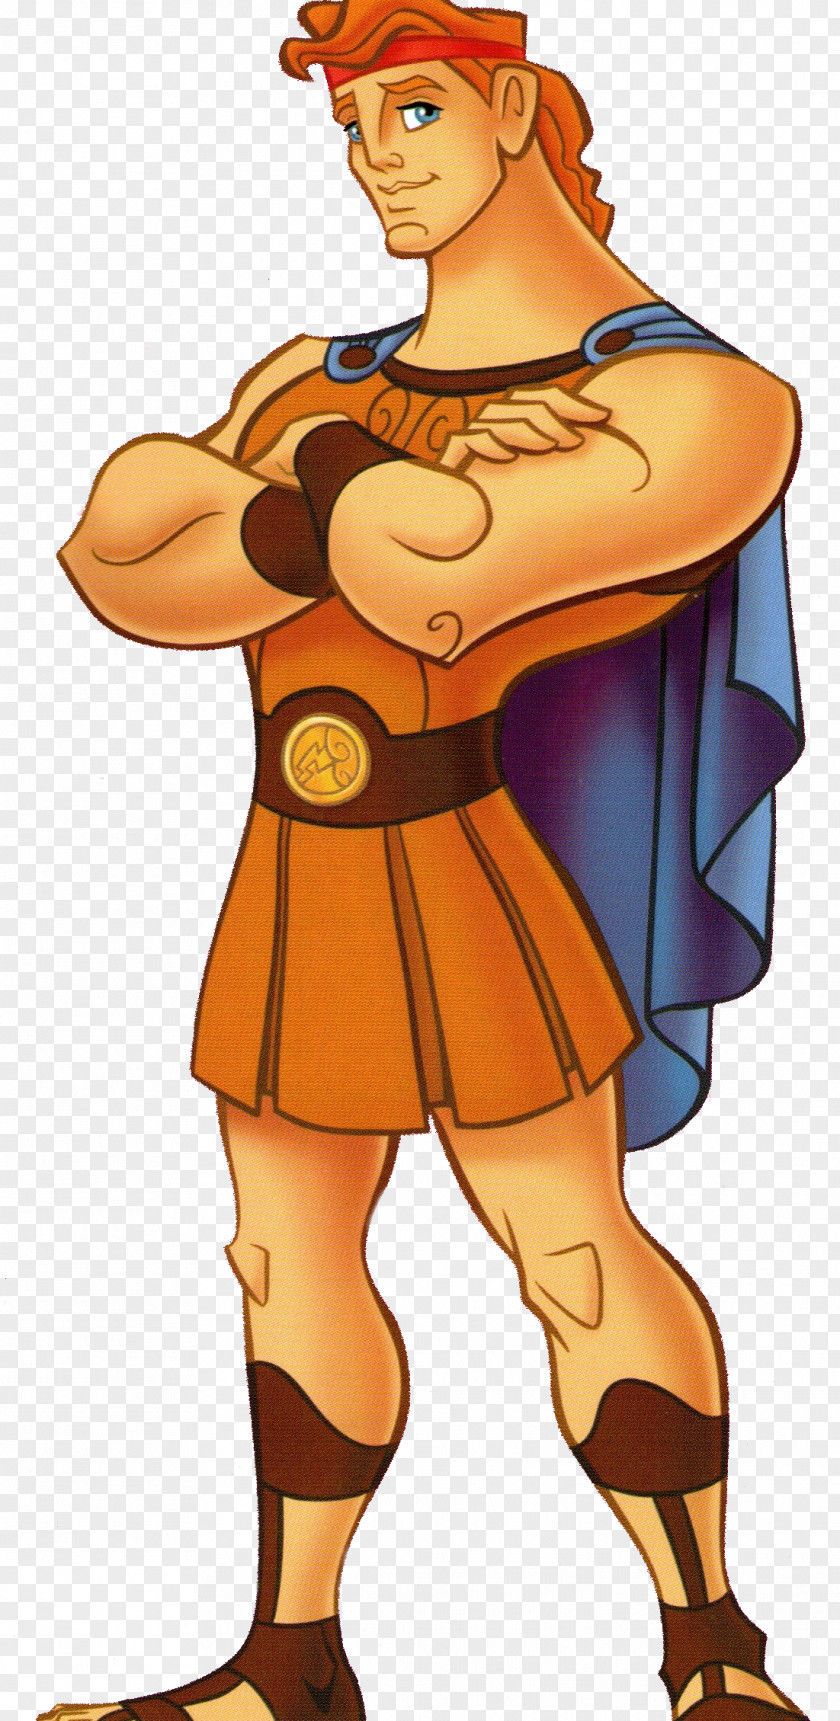 Unknown Birds Disney's Hercules YouTube Film Character PNG